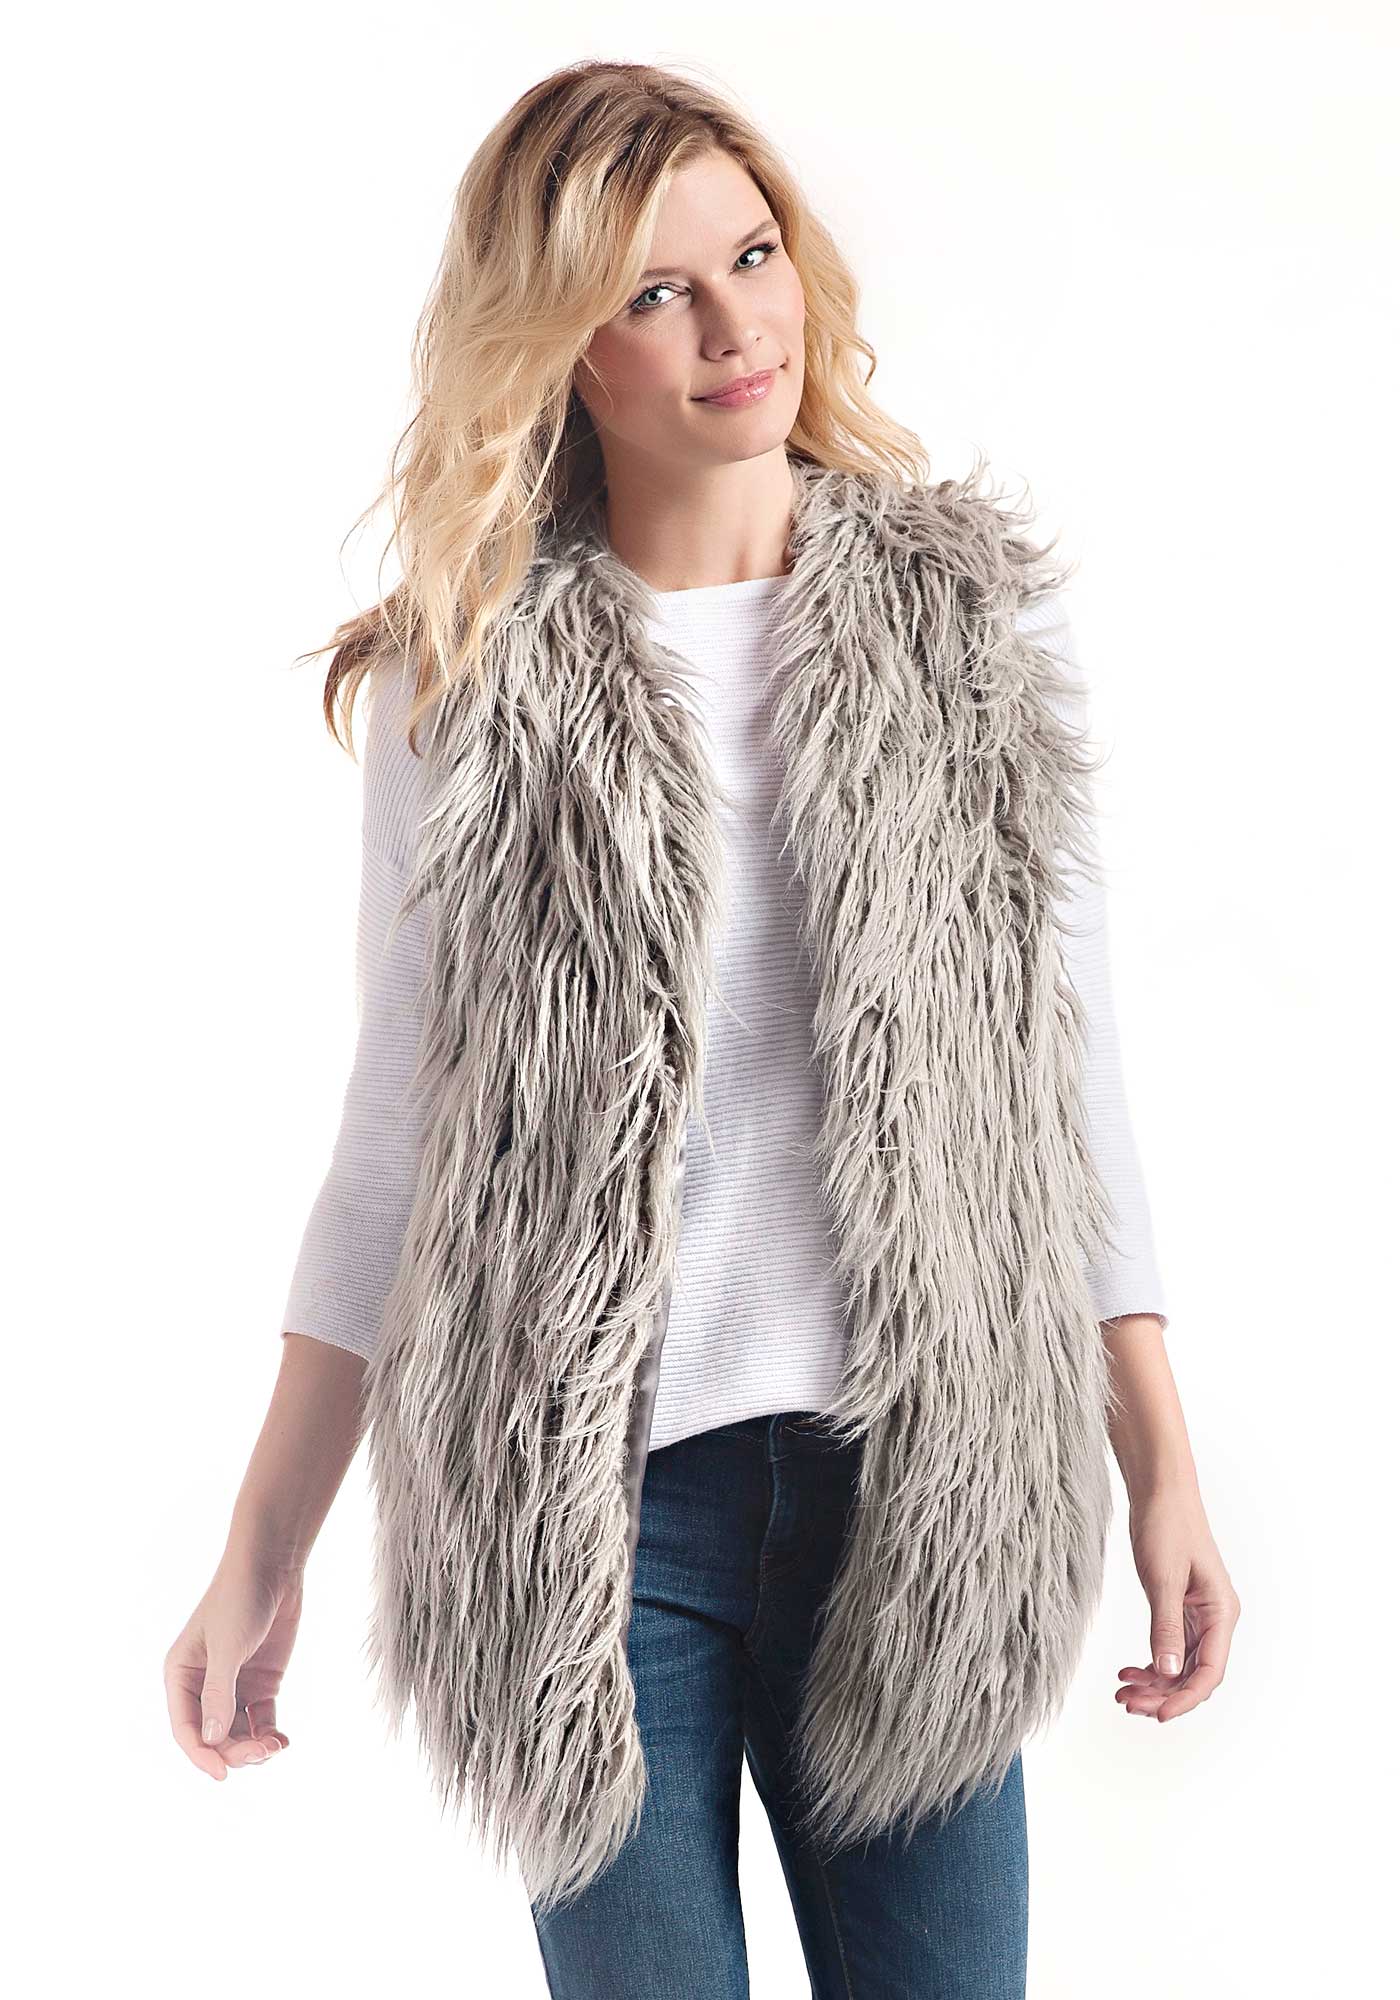 Faux Fur Vests Outfits – The Trendies and Sexiest – careyfashion.com